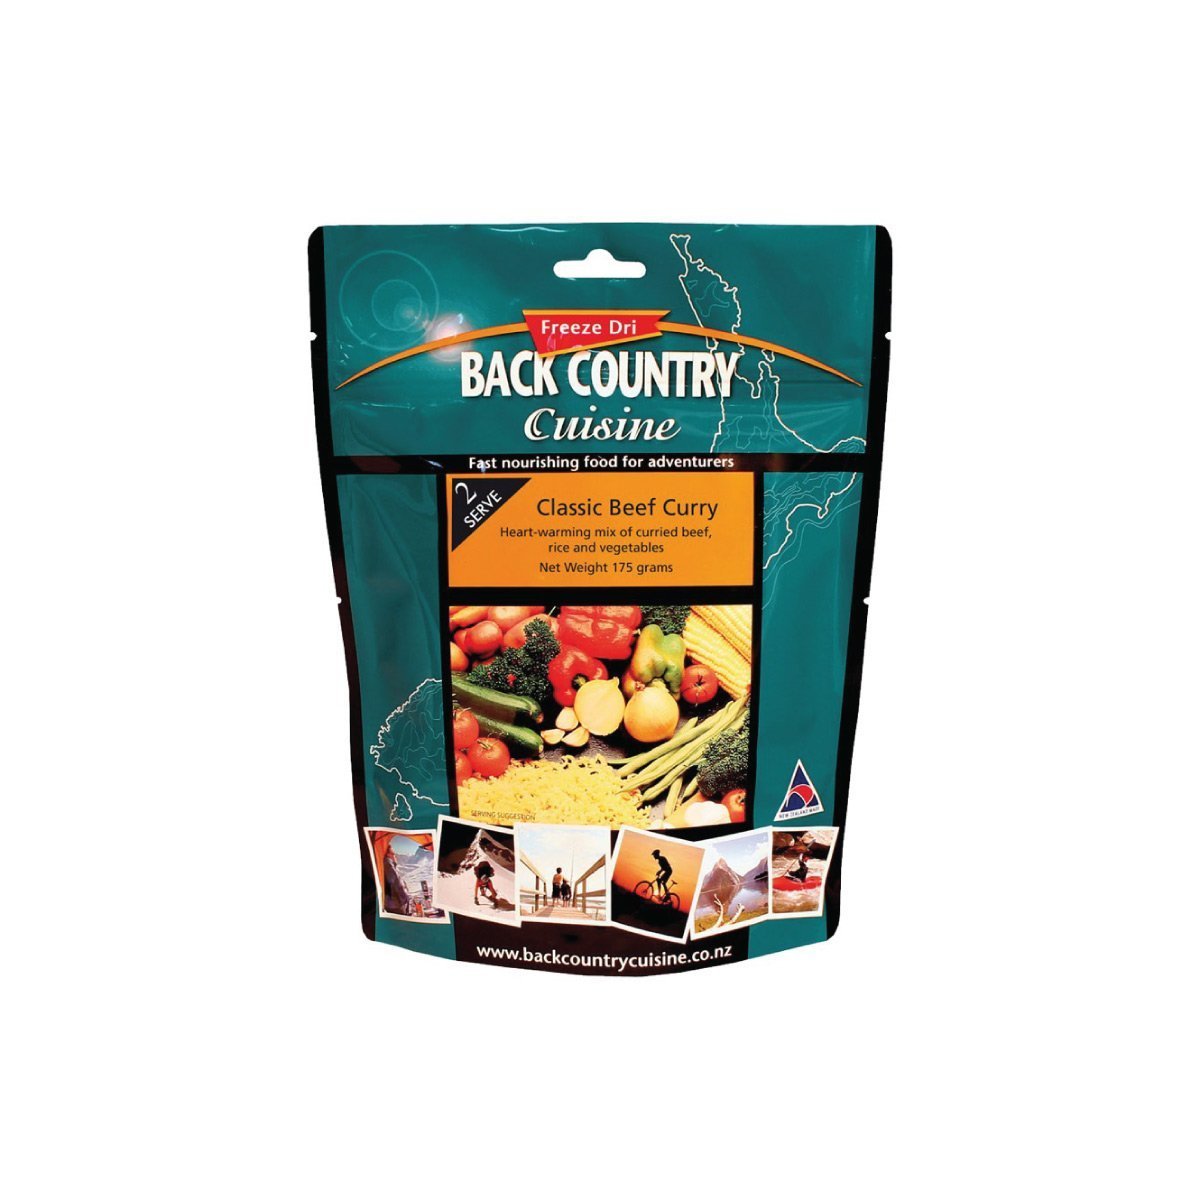 Back Country Cuisine Classic Beef Curry Gluten Free - Pack of 10 Outdoor and Survival Products Back Country Cuisine 1 Serve (90g) Tactical Gear Supplier Tactical Distributors Australia